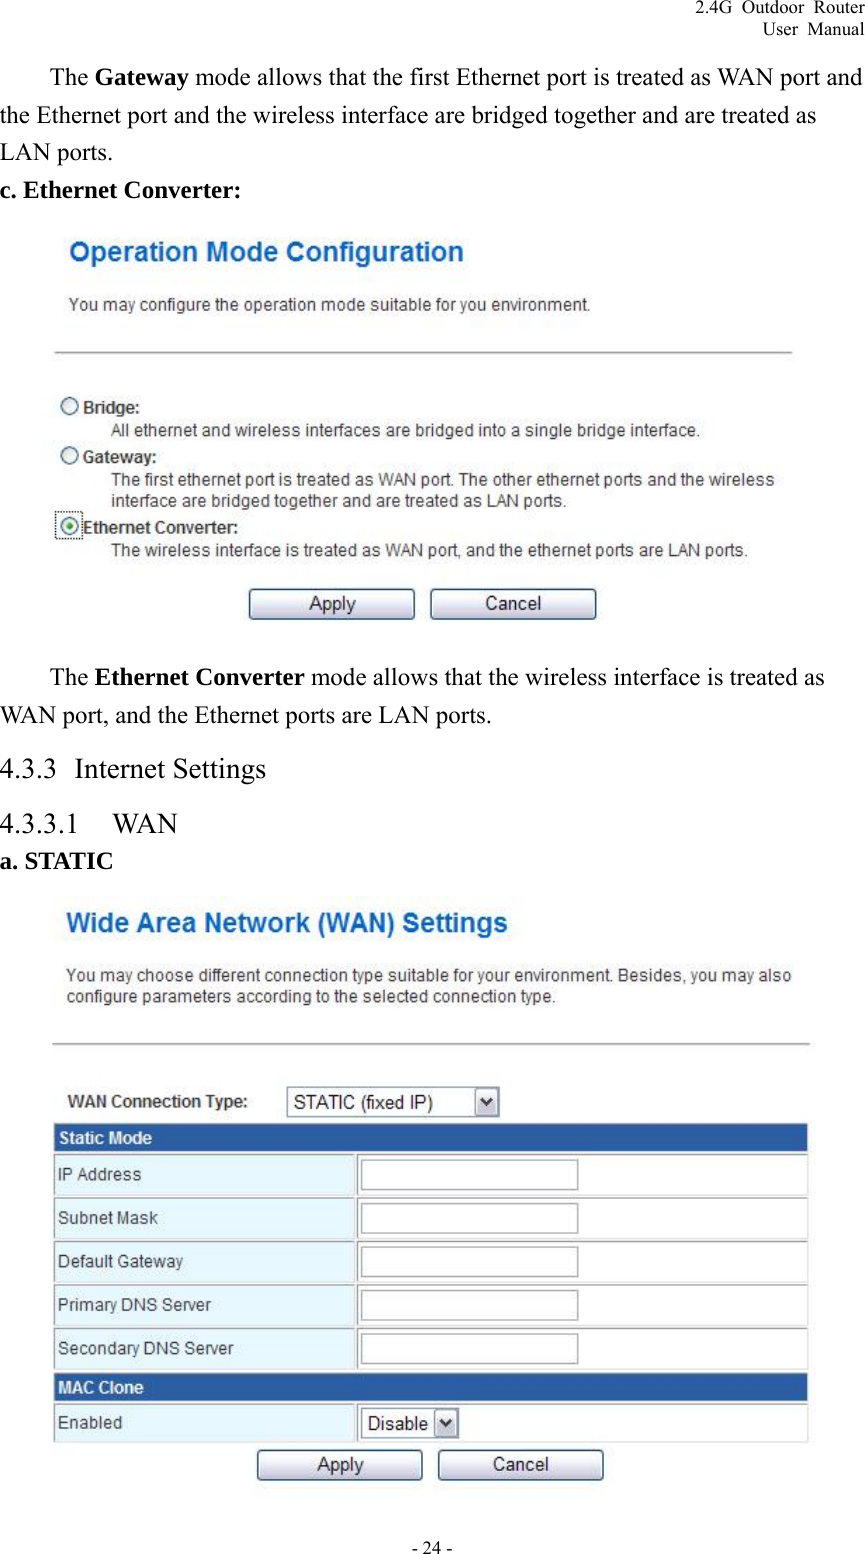 2.4G Outdoor Router User Manual The Gateway mode allows that the first Ethernet port is treated as WAN port and the Ethernet port and the wireless interface are bridged together and are treated as LAN ports. c. Ethernet Converter:  The Ethernet Converter mode allows that the wireless interface is treated as WAN port, and the Ethernet ports are LAN ports. 4.3.3 Internet Settings 4.3.3.1 WAN a. STATIC  - 24 - 